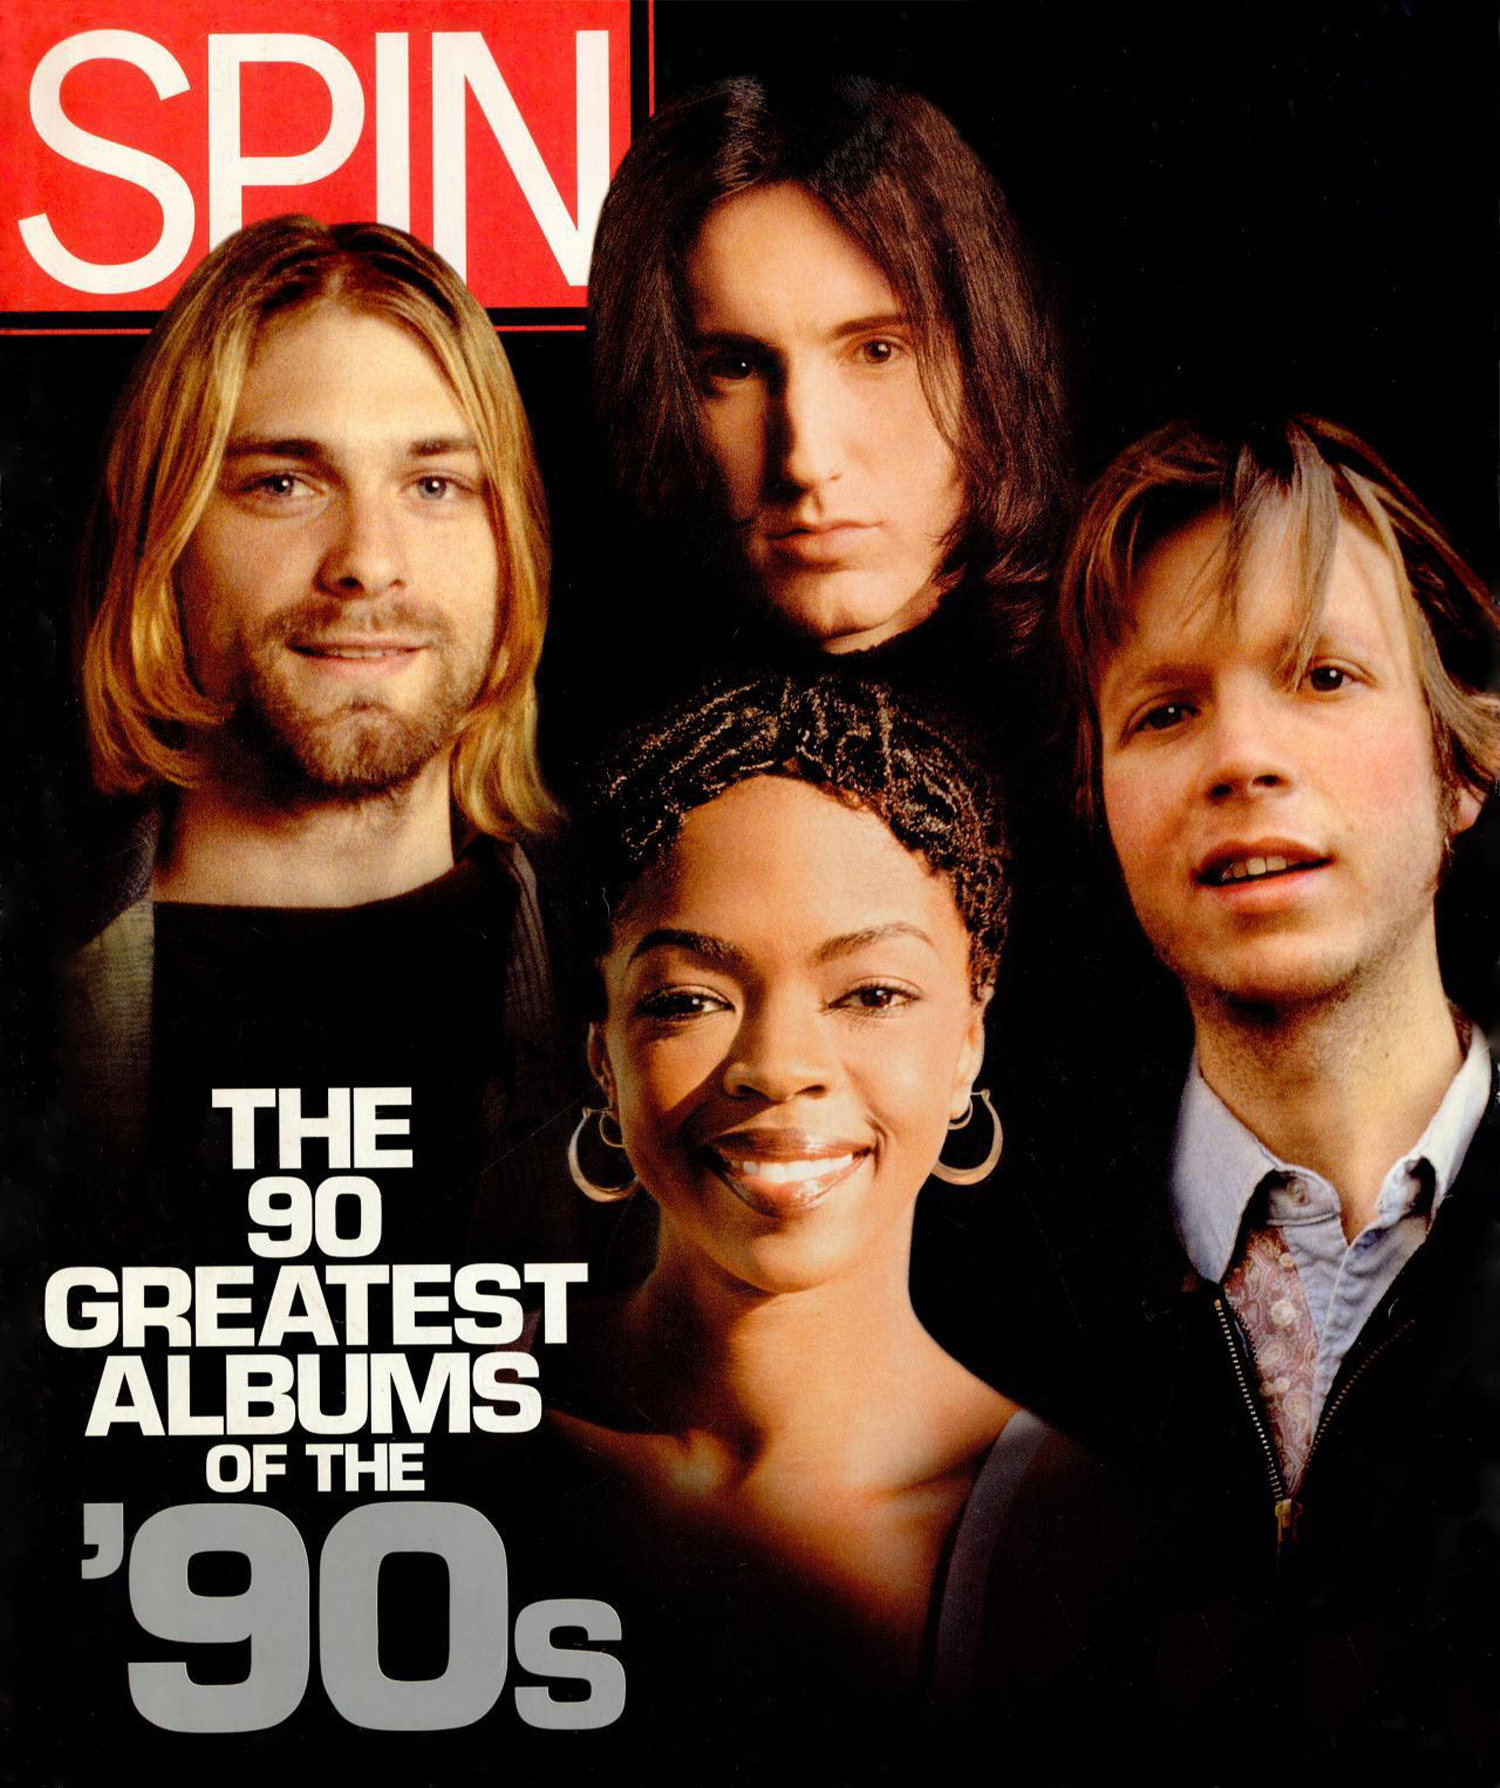 SPIN 90 Greatest Albums of the 90s